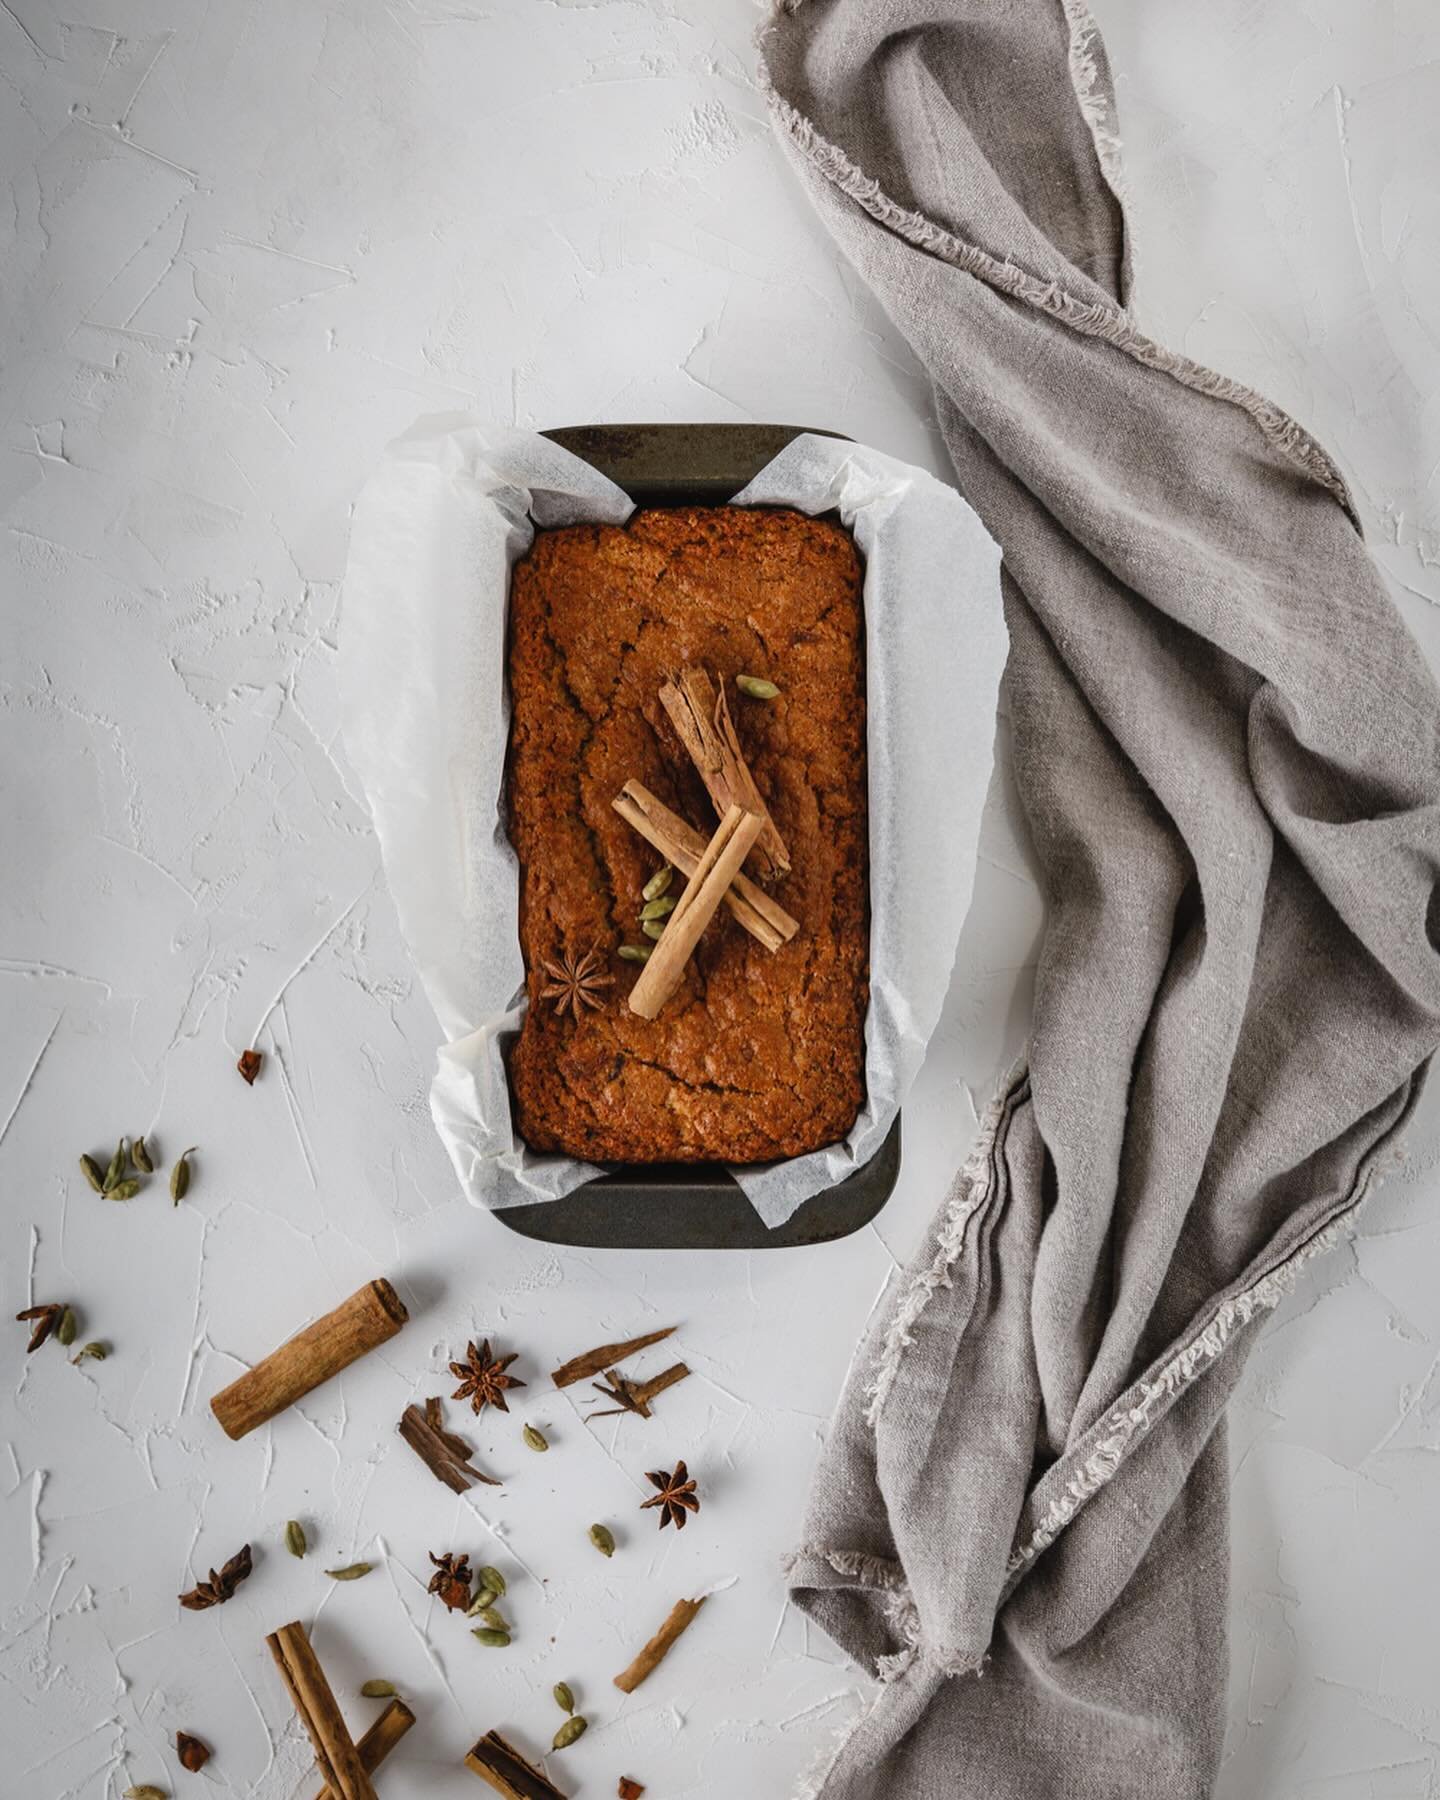 These brisk autumn days have had me craving this spiced banana bread by chef @tenilleevans loaded up with a shit load of butter, of course.